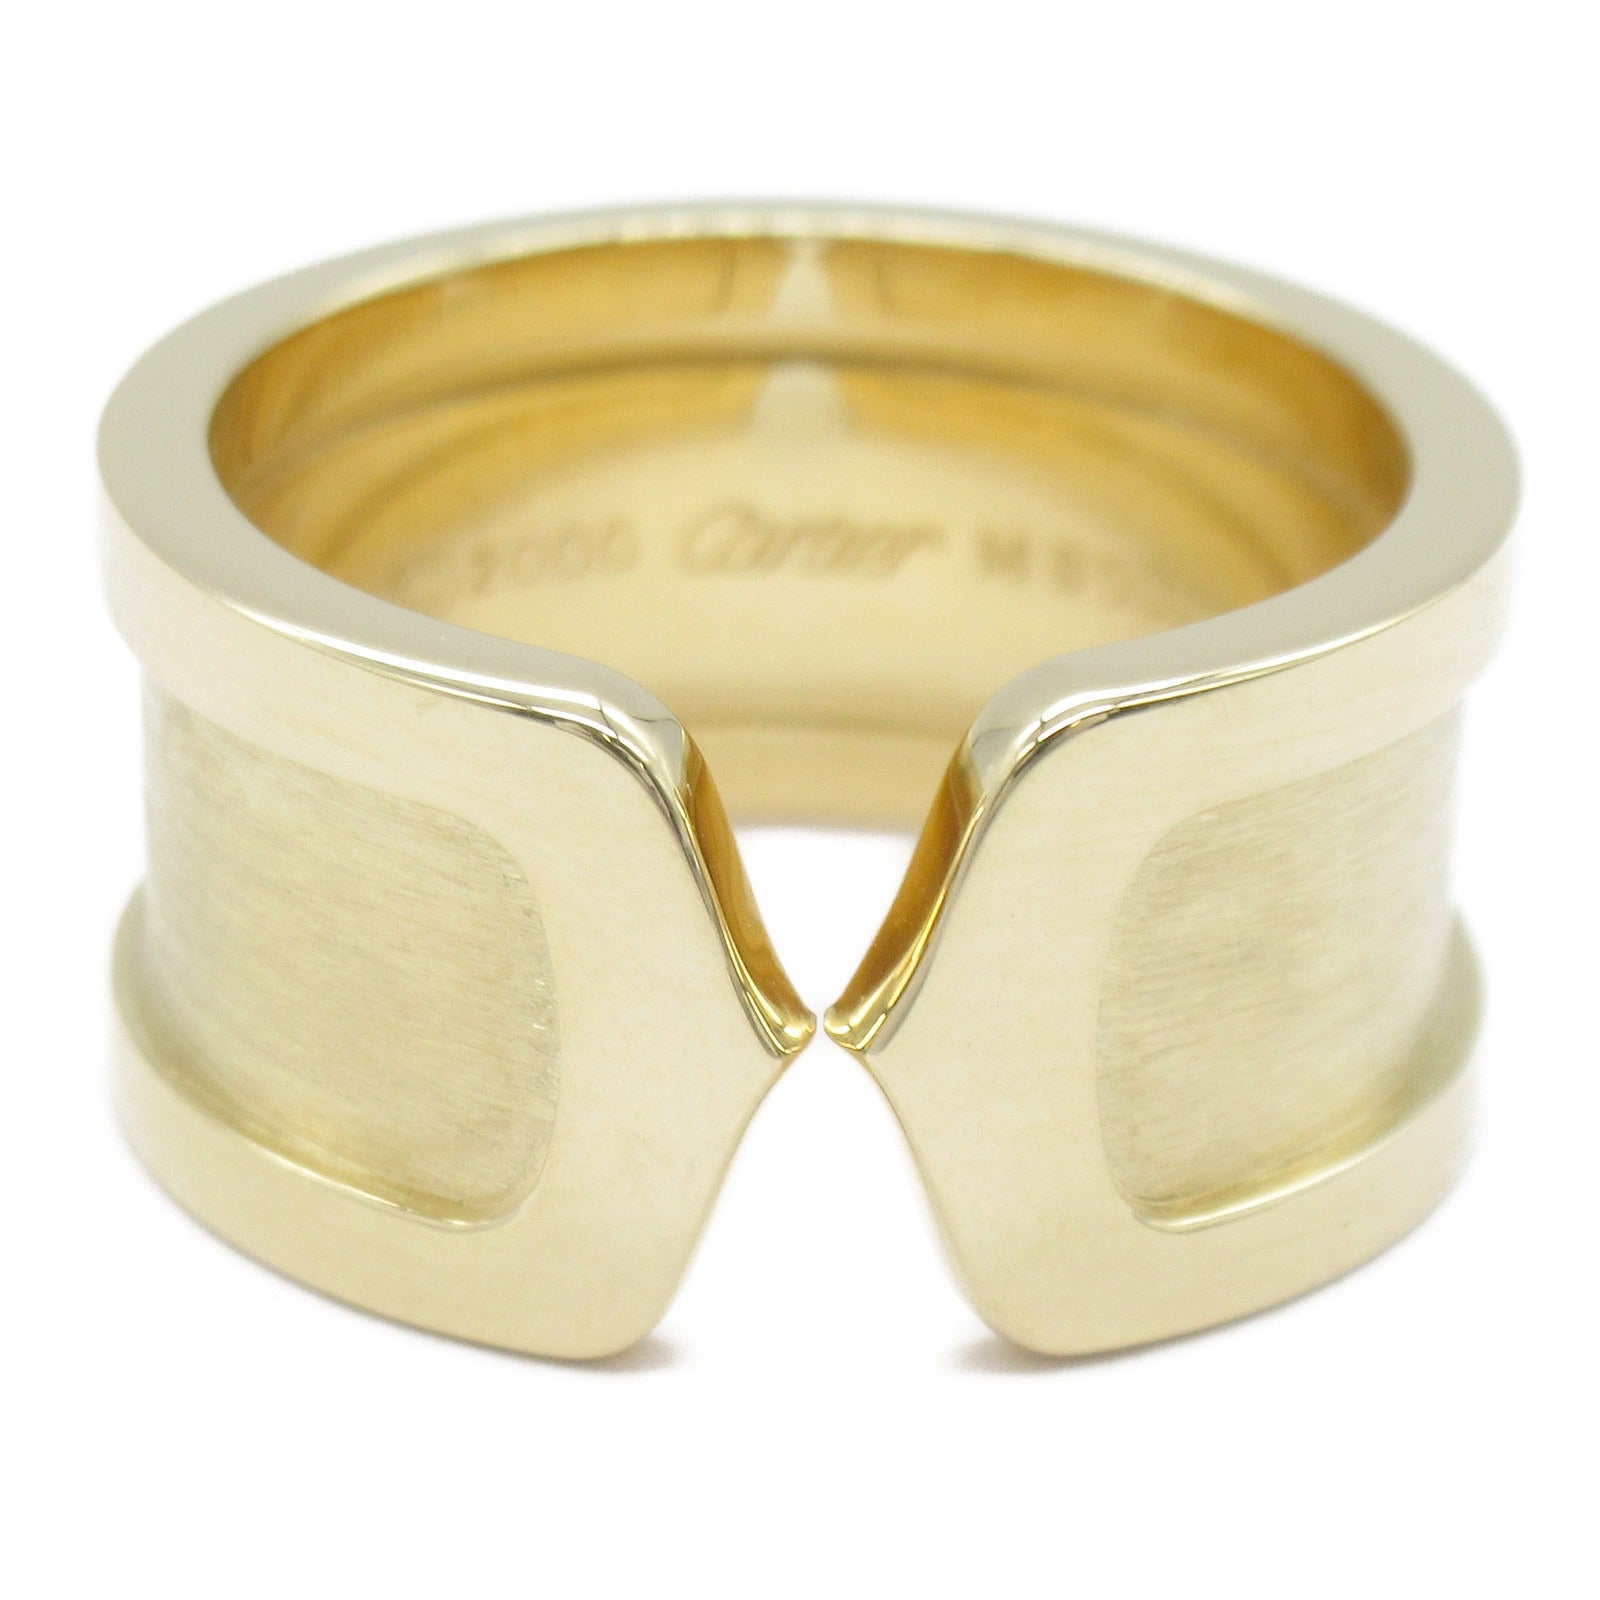 Cartier C2 Ring Ring Ring Jewelry K18 (Yellow G)  Gold  ()